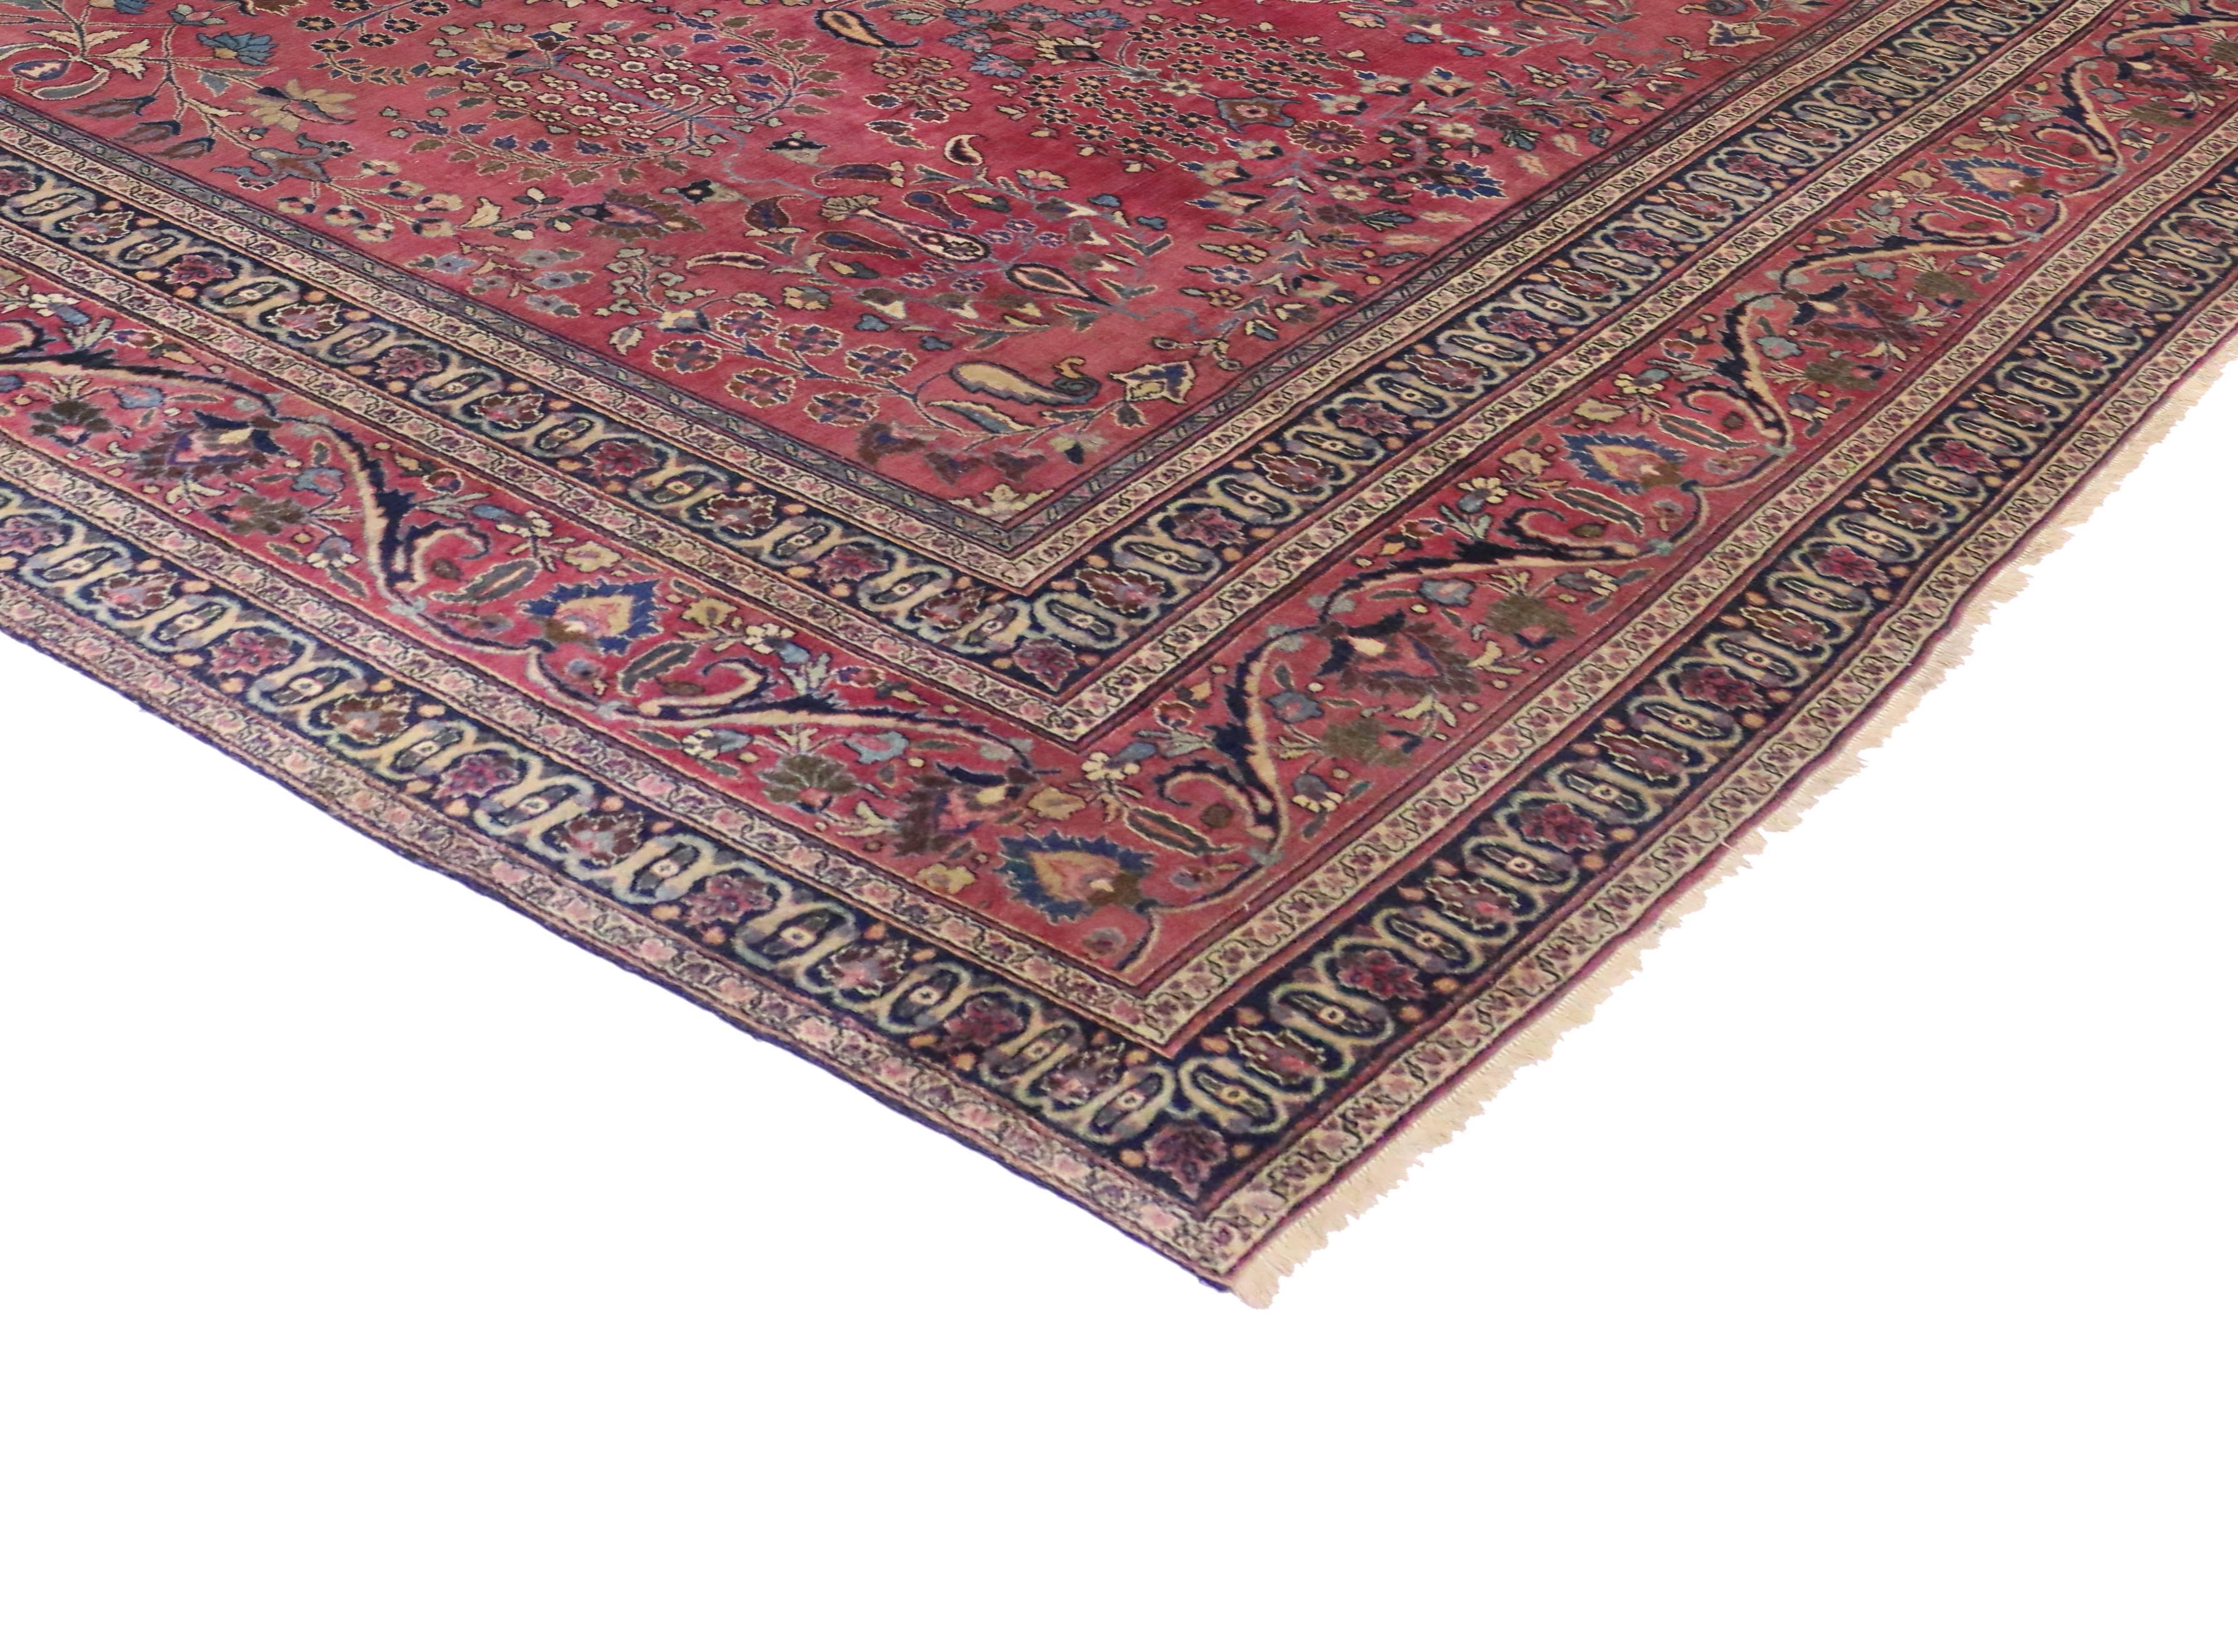 Antique Persian Khorassan Rug with Modern Victorian Style and Old World Vibes  In Good Condition For Sale In Dallas, TX